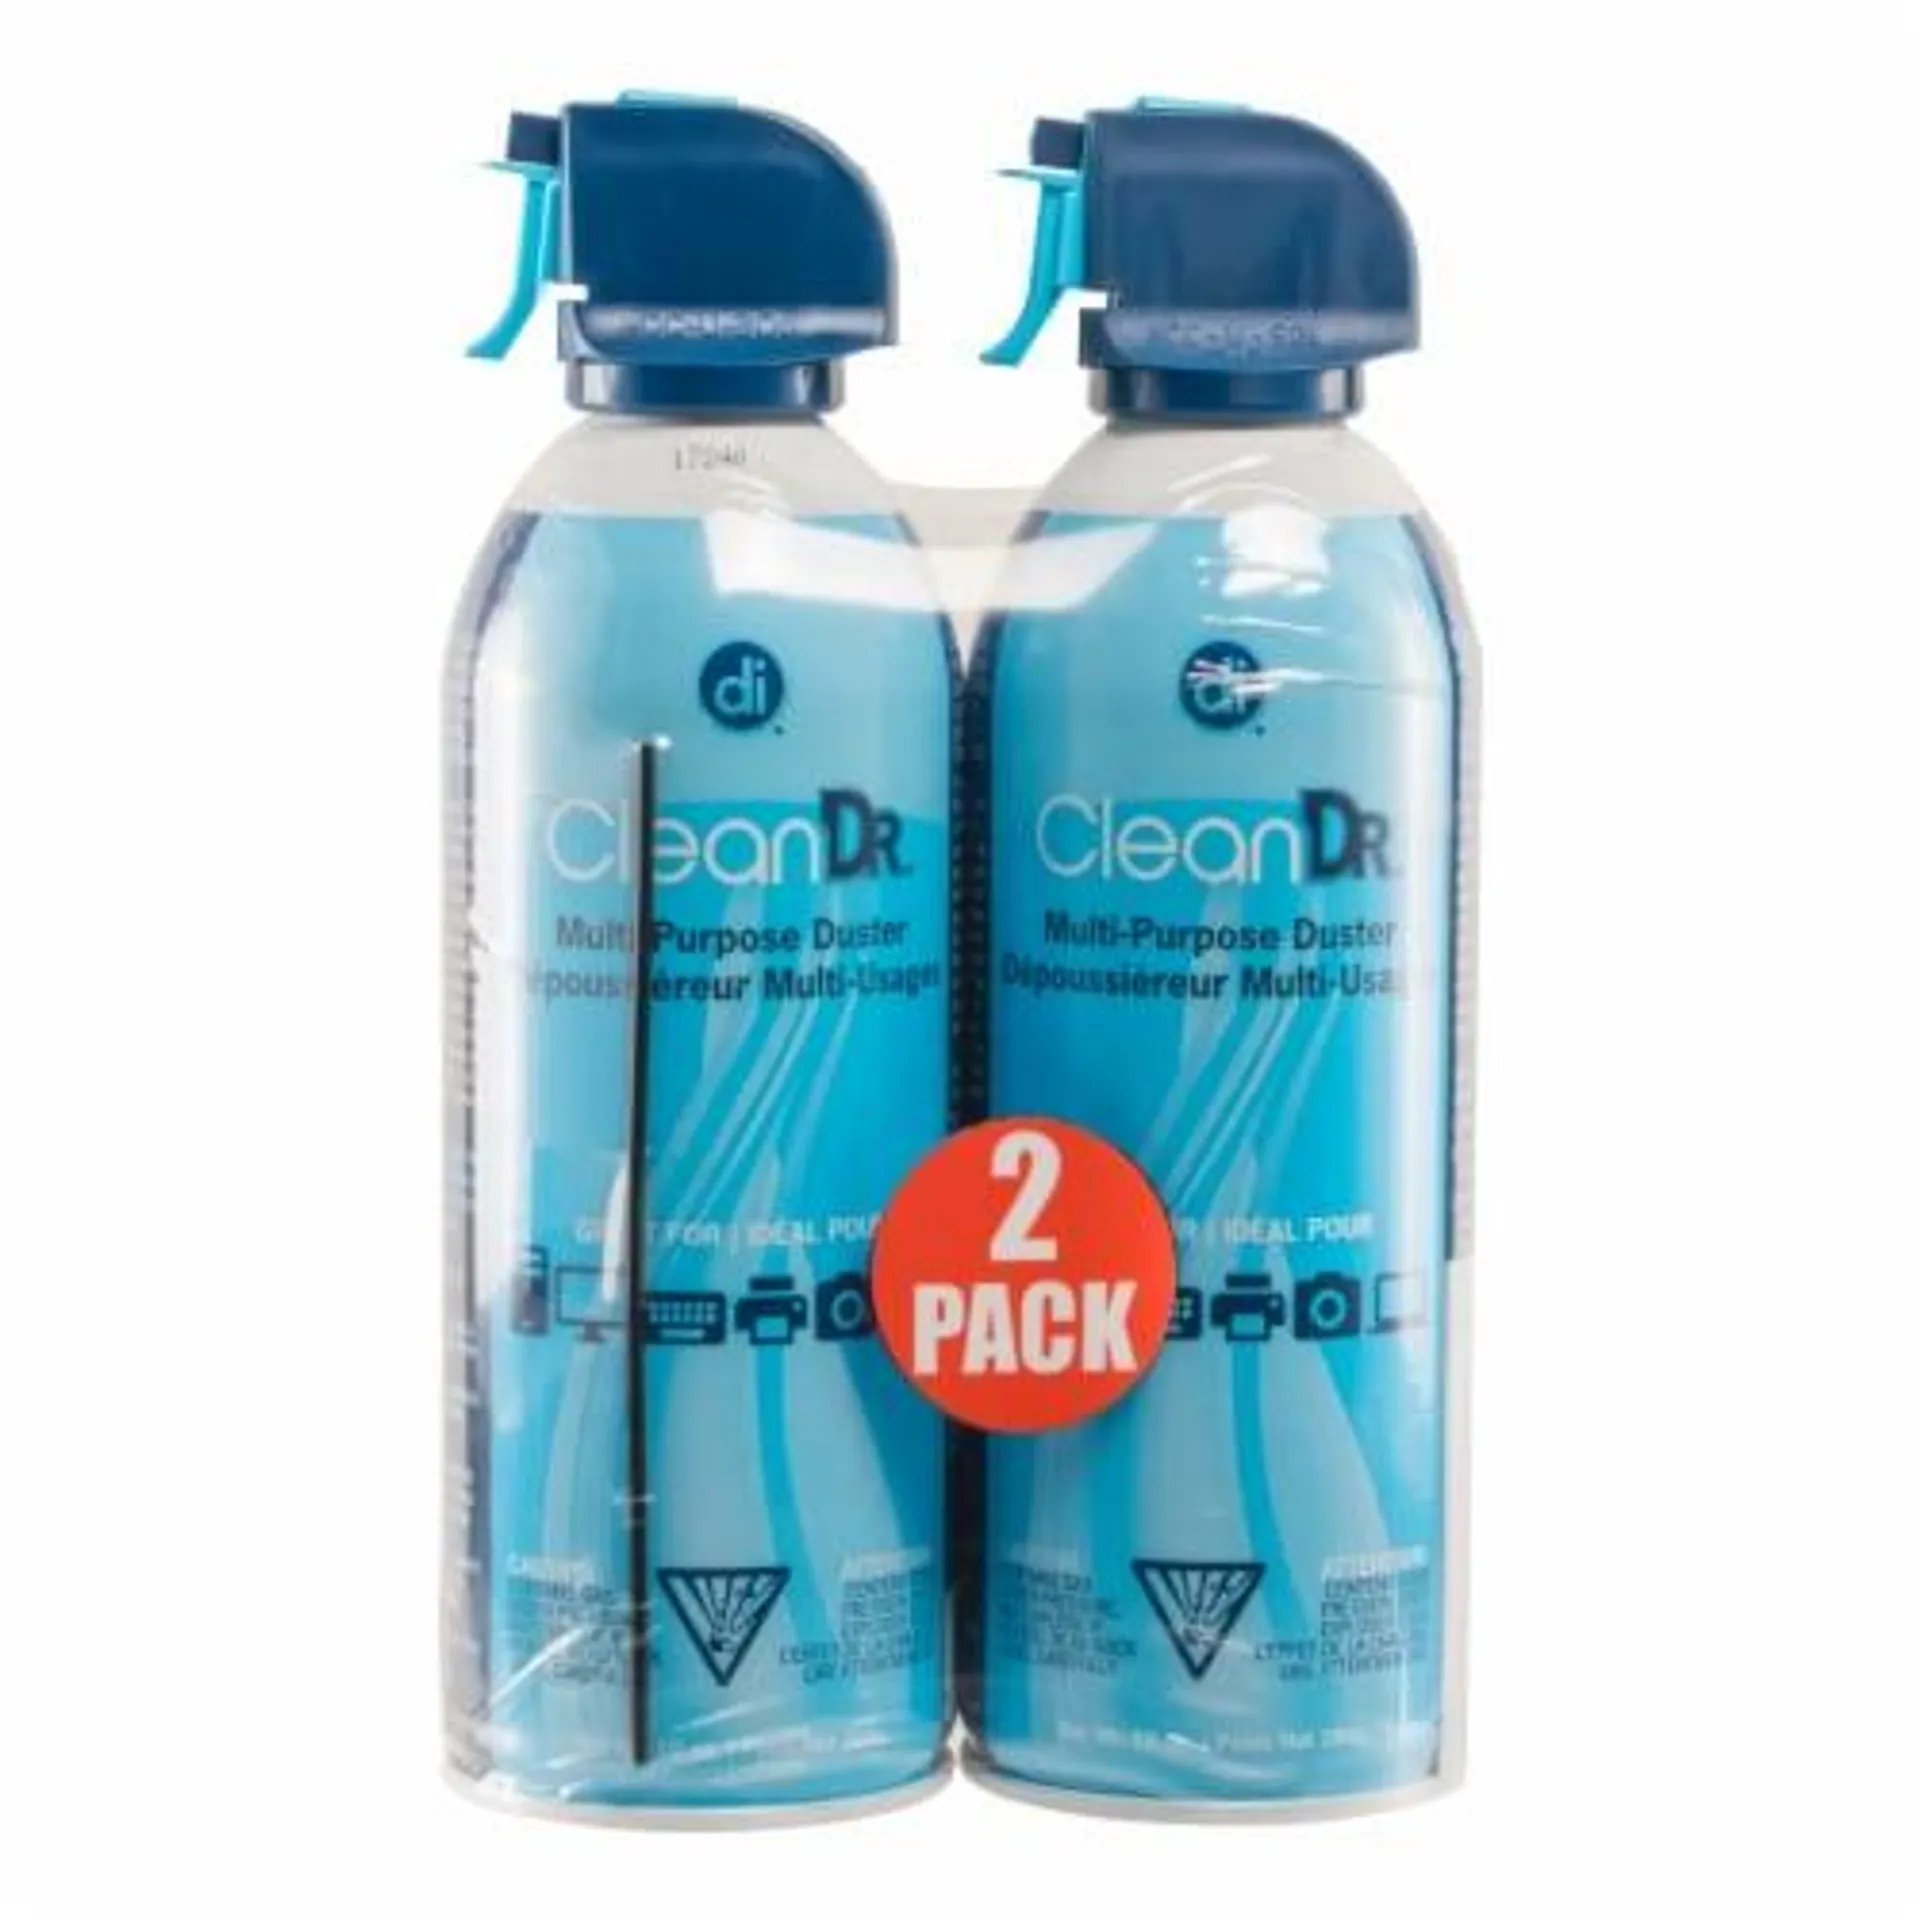 Digital Innovations CleanDr Canned Air Multi-Purpose Duster - 2 pk - Blue/White